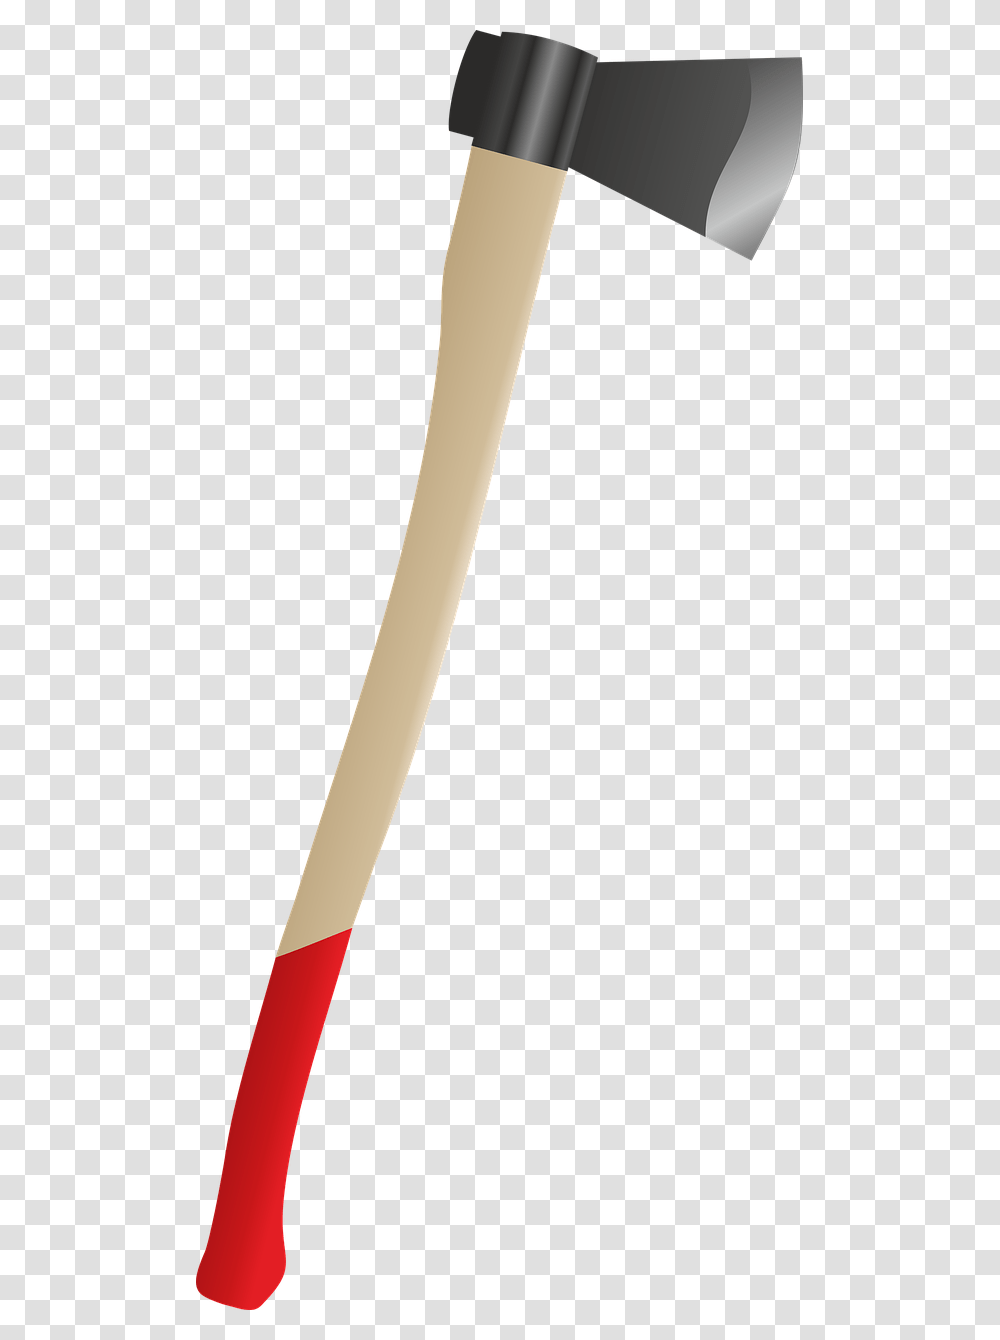 Axe Red Pen Fire Axe Free Photo Carmine, Tool, Sword, Blade, Weapon Transparent Png